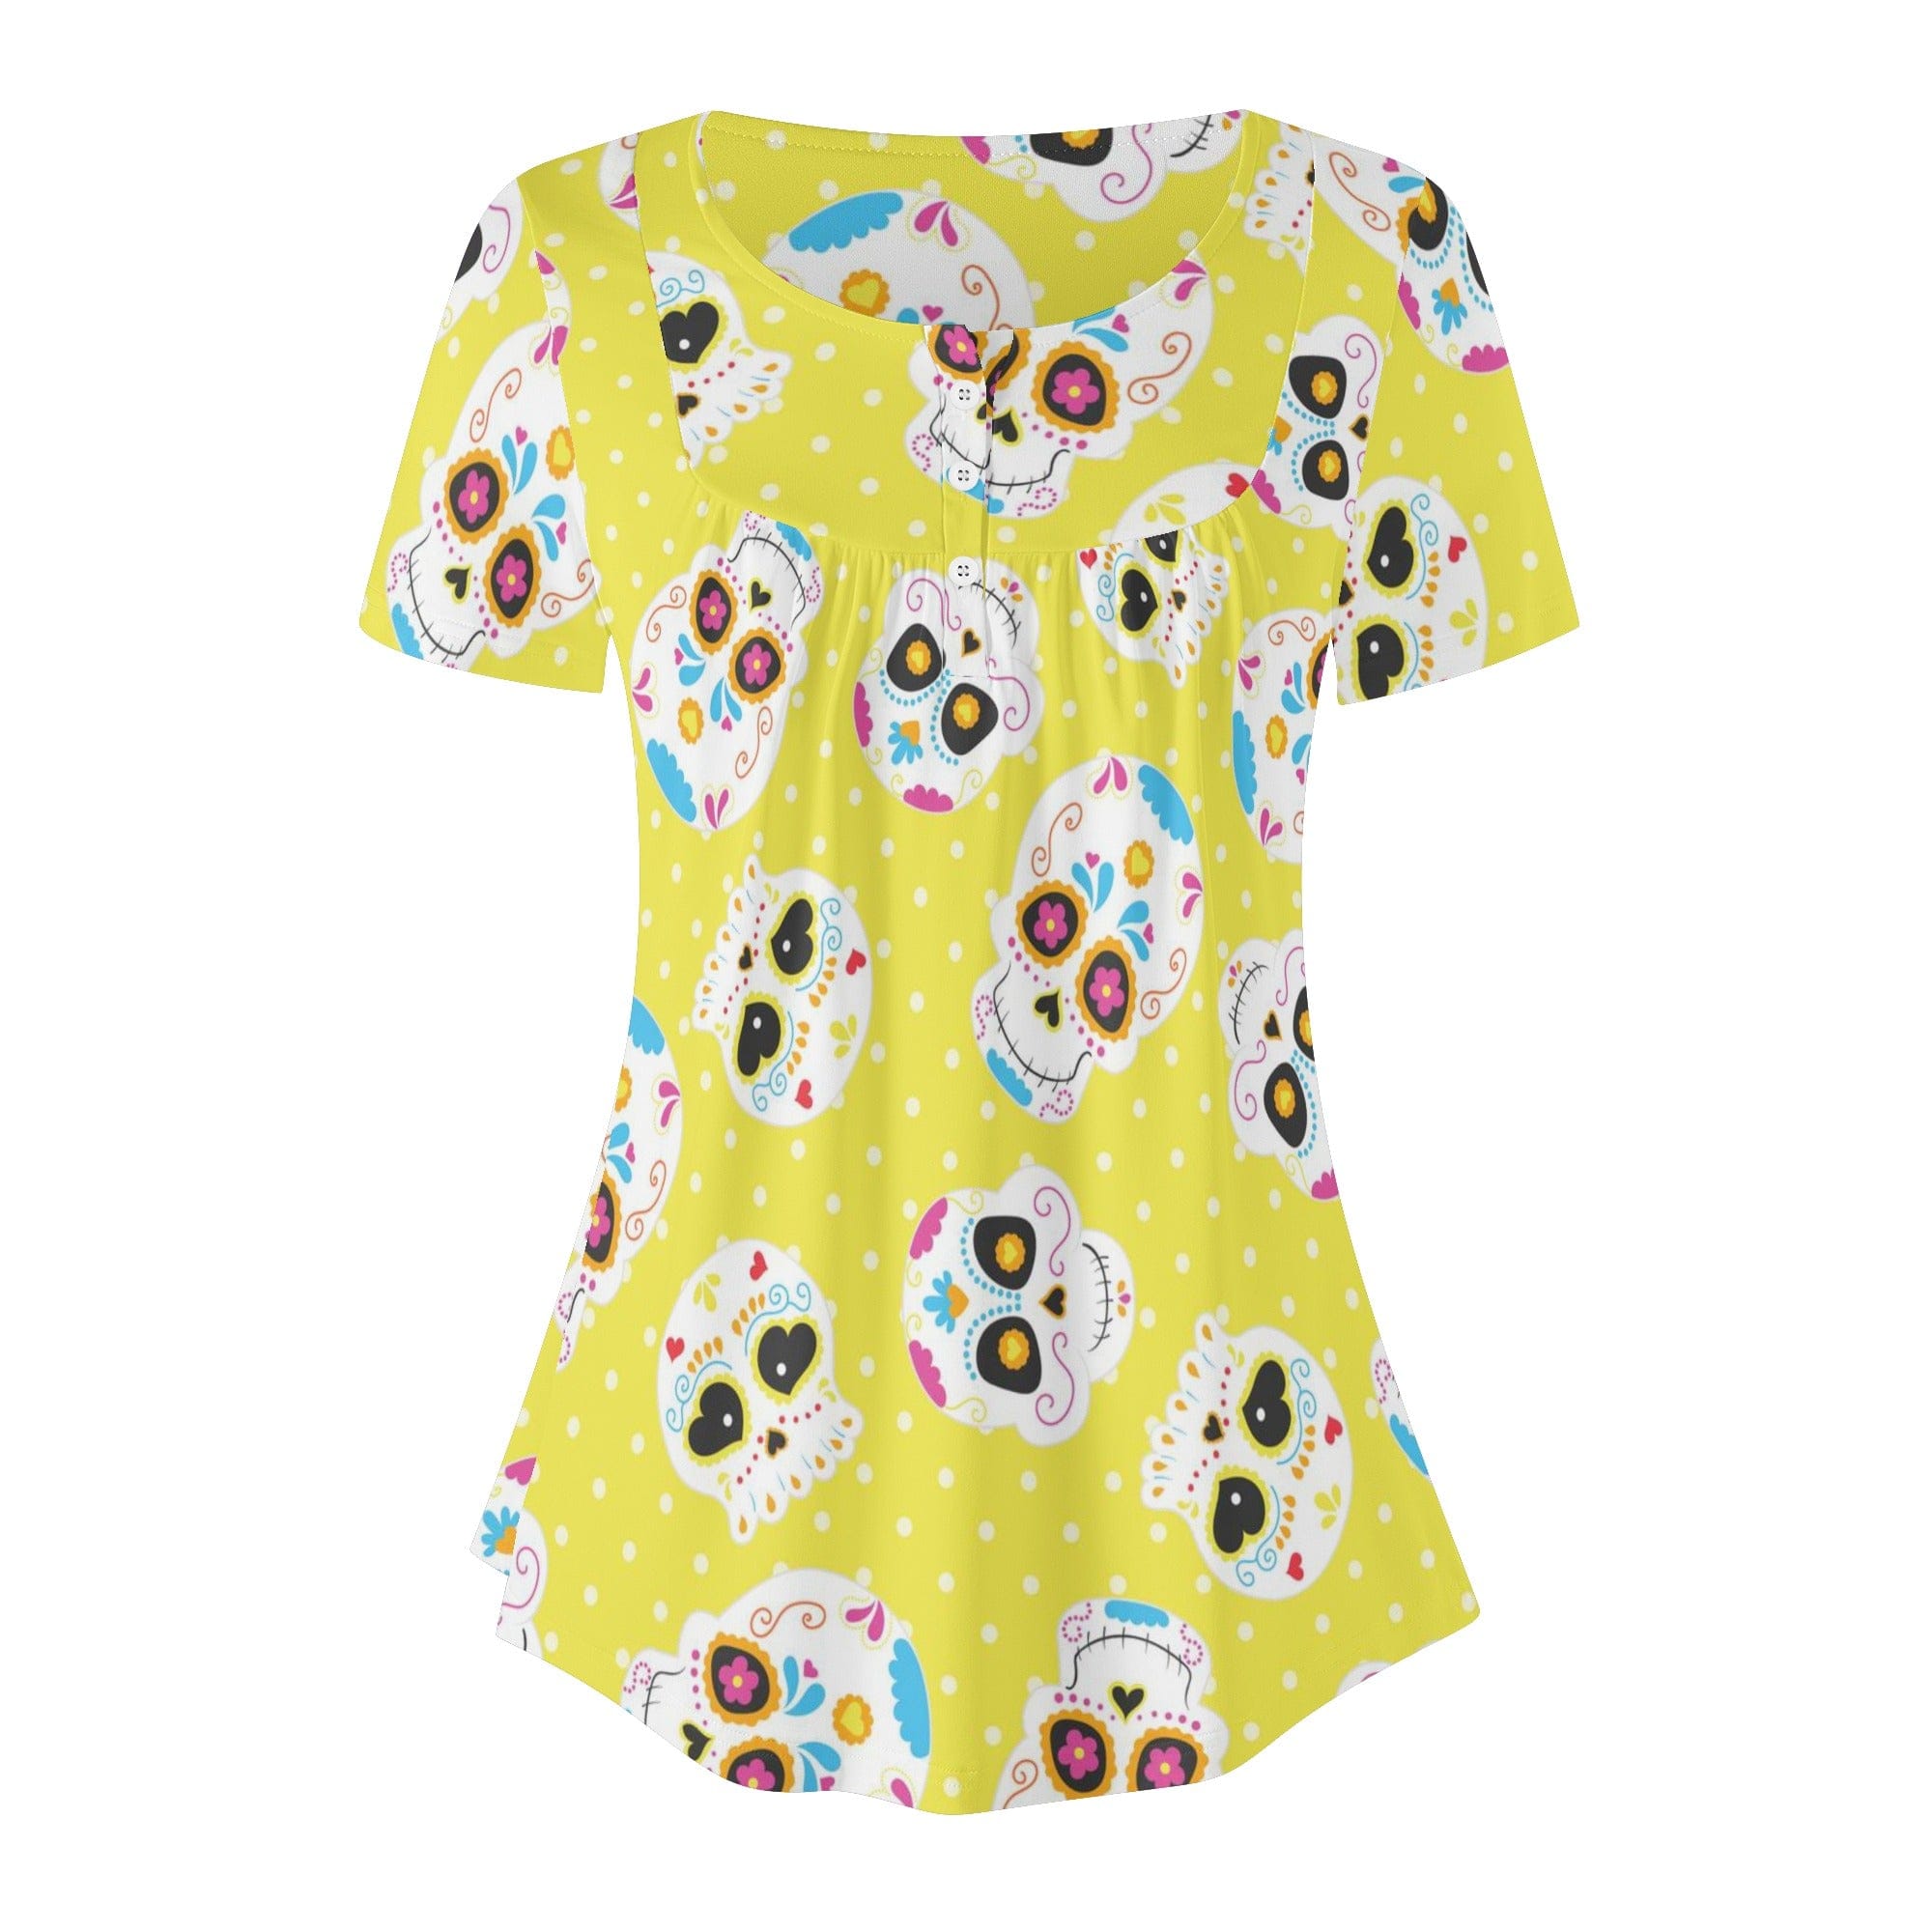 Be Bold & Express Yourself In The Captivating Women's Yellow Skulls V-neck Blouse